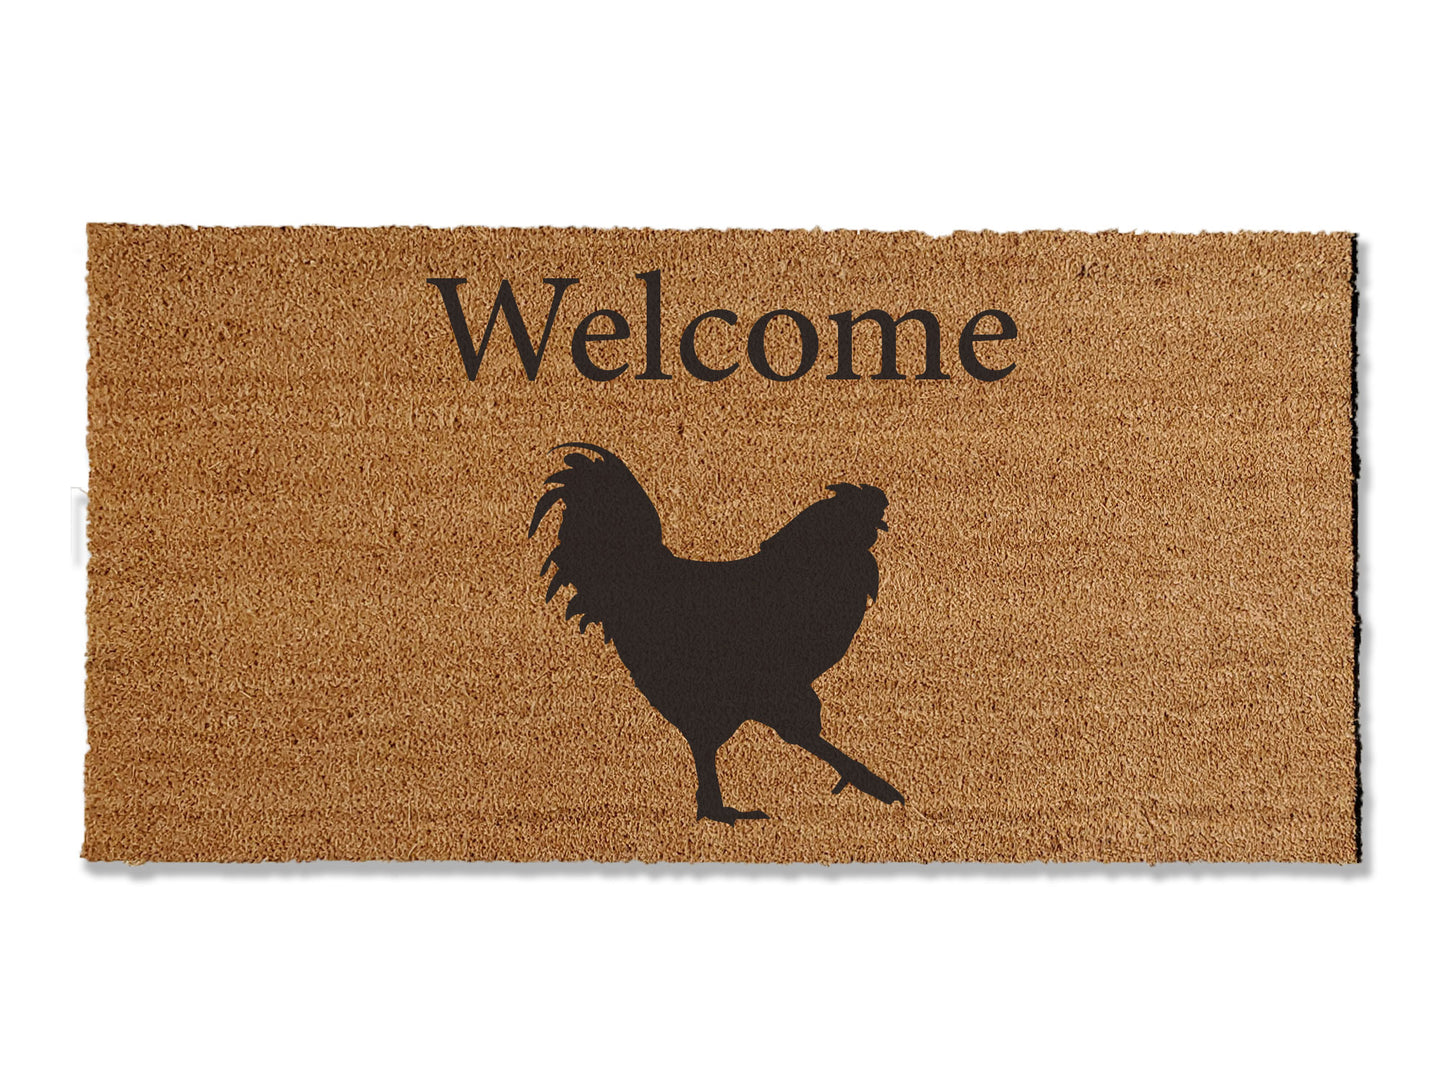 Rooster Doormat - Farmhouse Welcome Mat